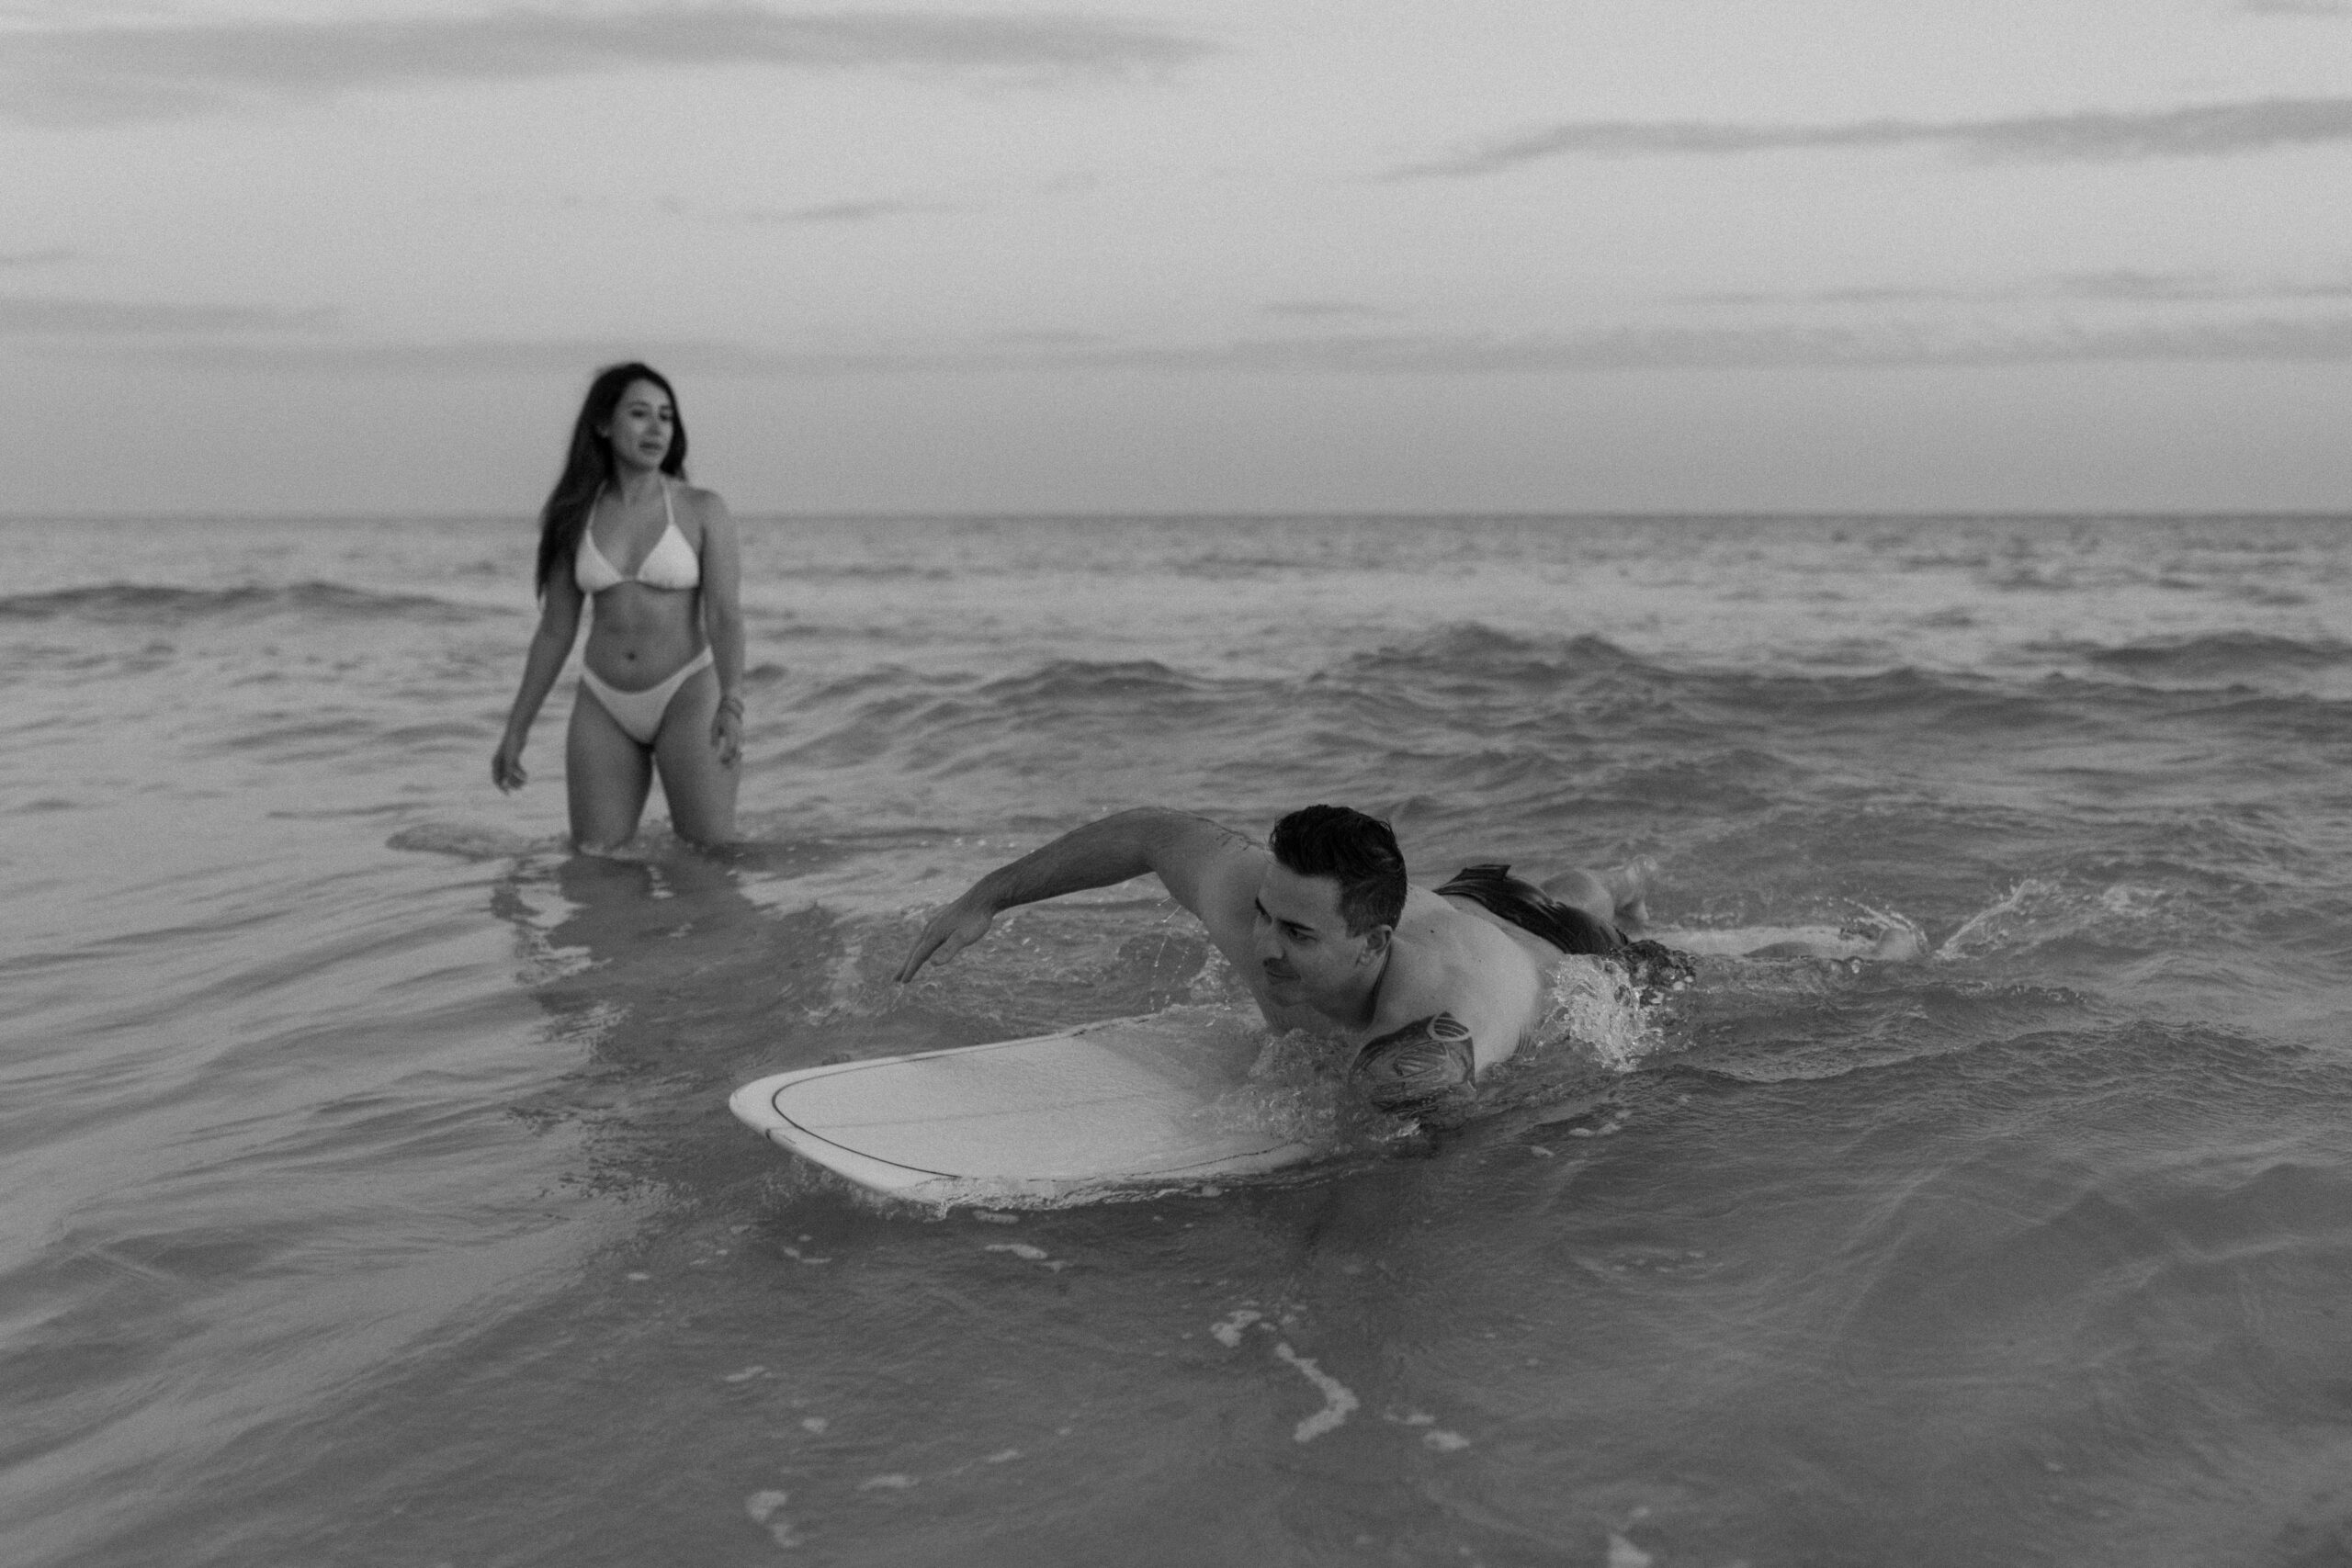 A man riding waves on a surfboard as his partner is next to him in the water during their sunset couple photoshoot on the beach